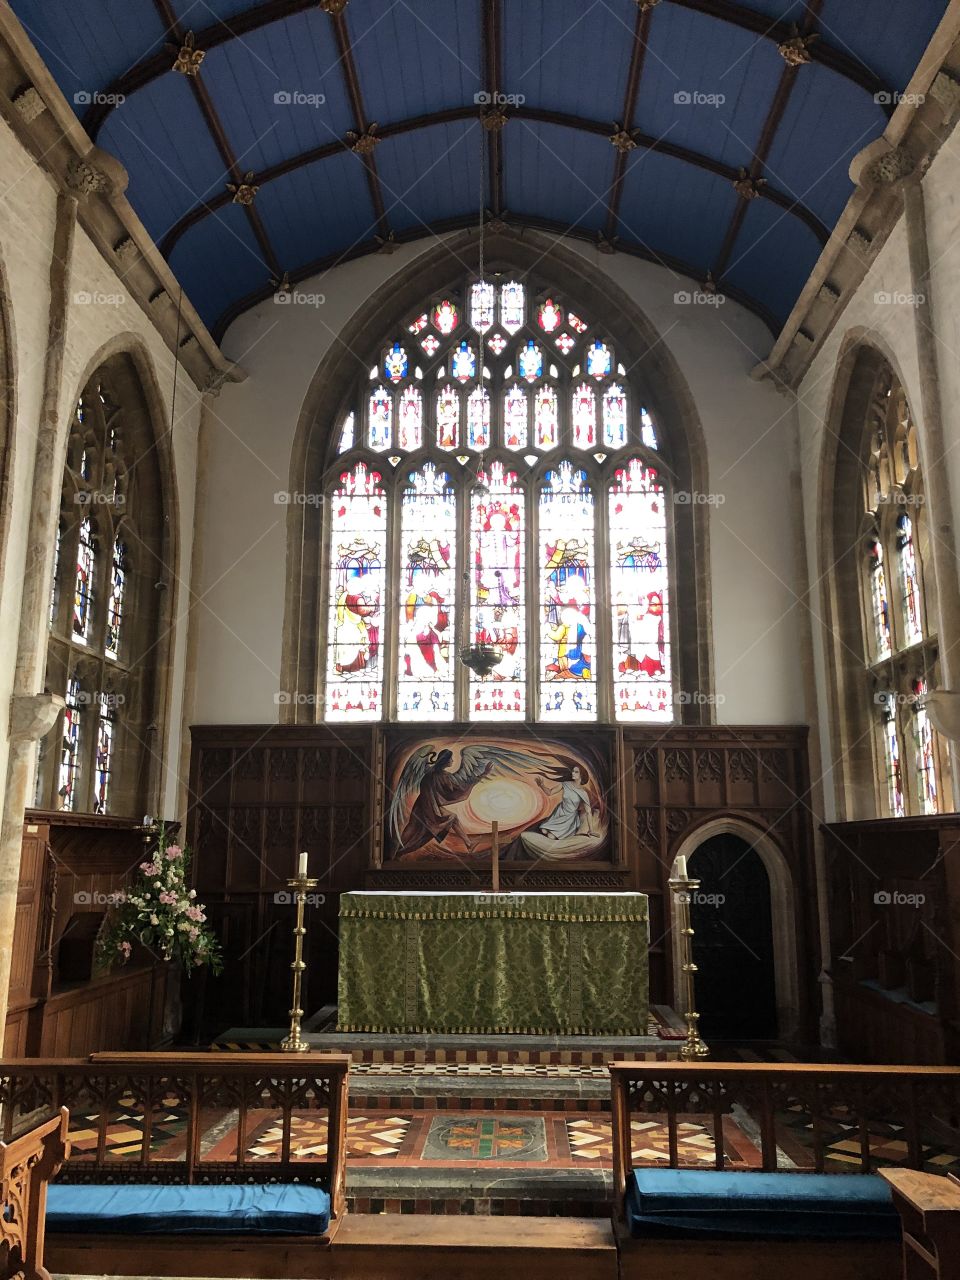 I of two internal photos of St Mary’s Church North Petherton in Somerset.